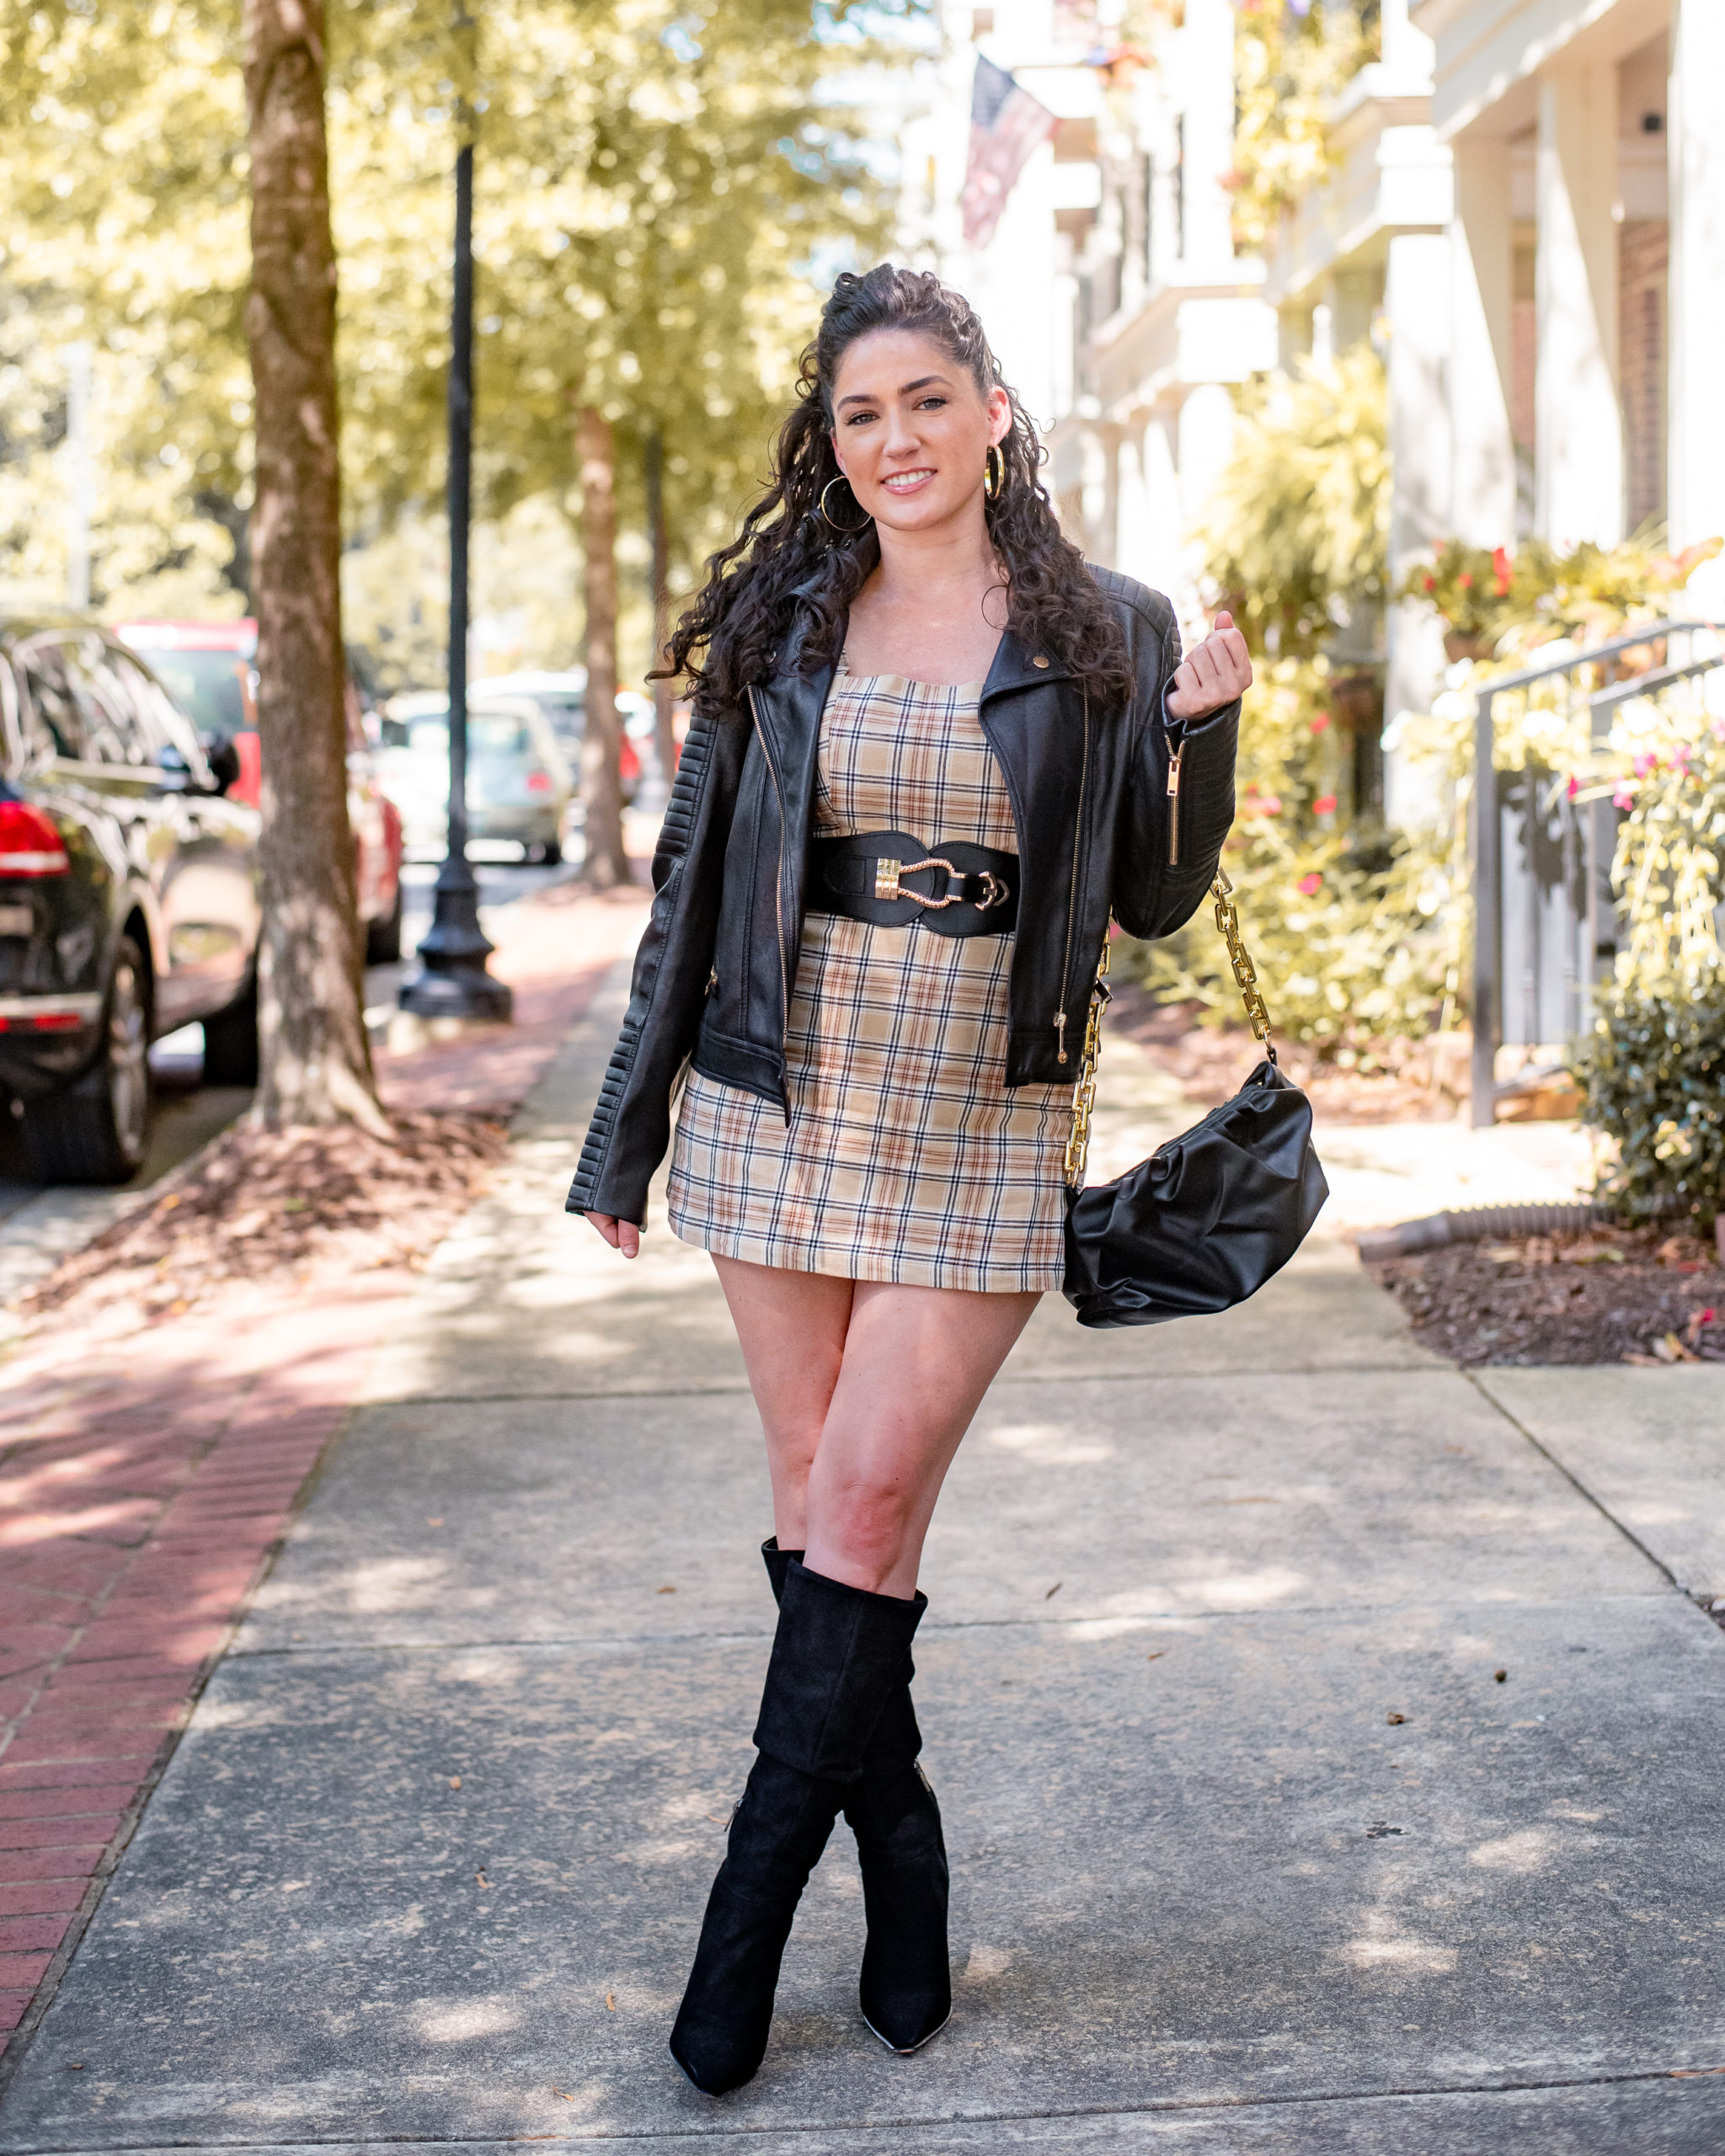 day to night style, Plaid jumper, skort romper, day to night outfit ideas, how to transform your day outfit into a night outfit, fall outfit ideas that are affordable